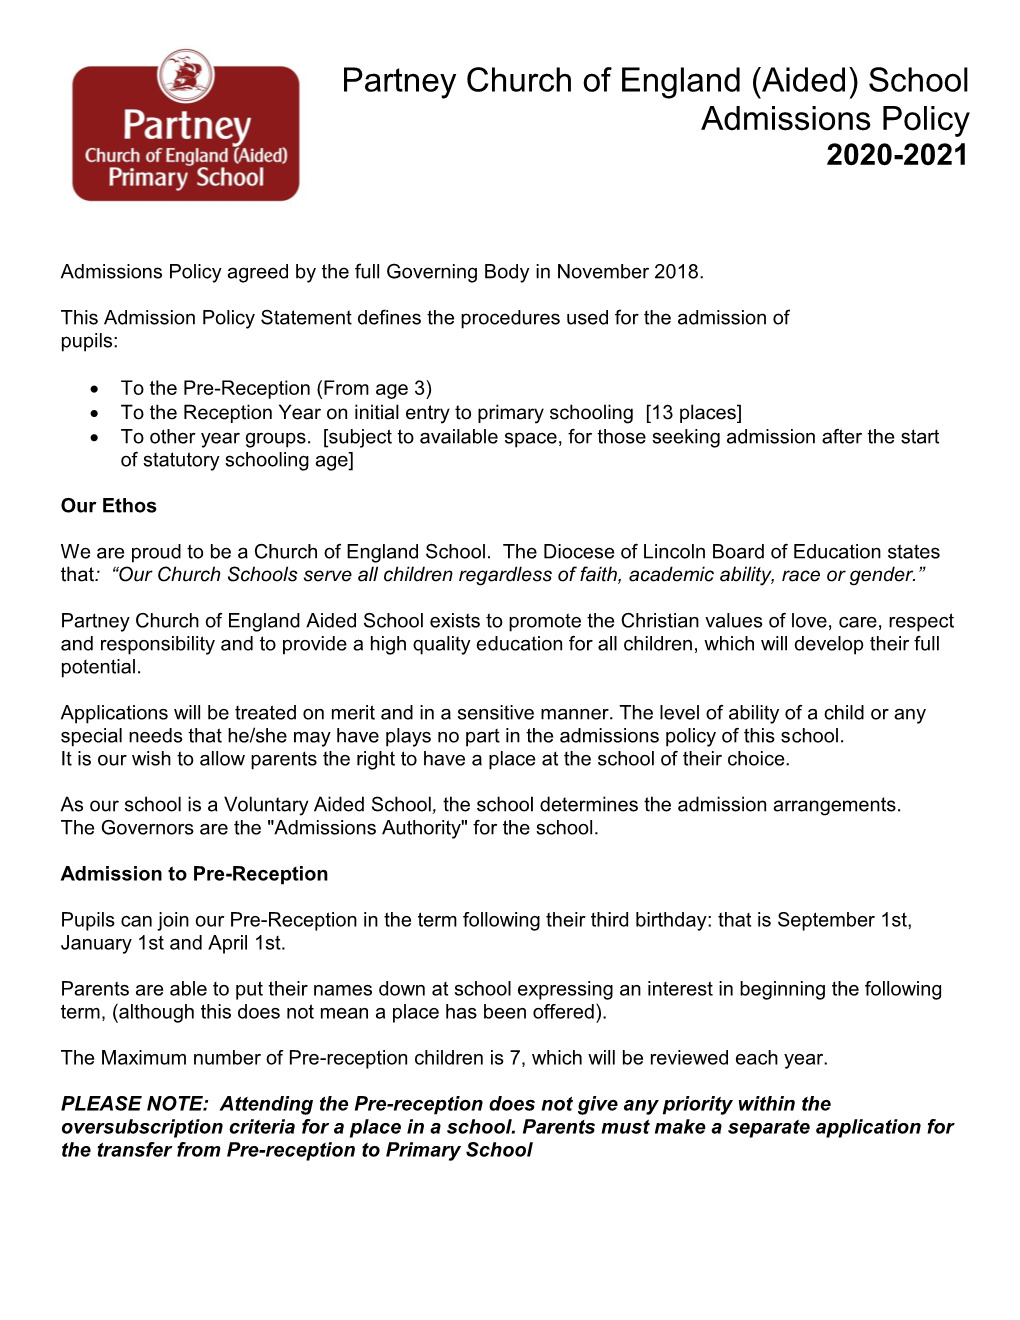 Partney CE Primary School Admissions Policy 2020-21